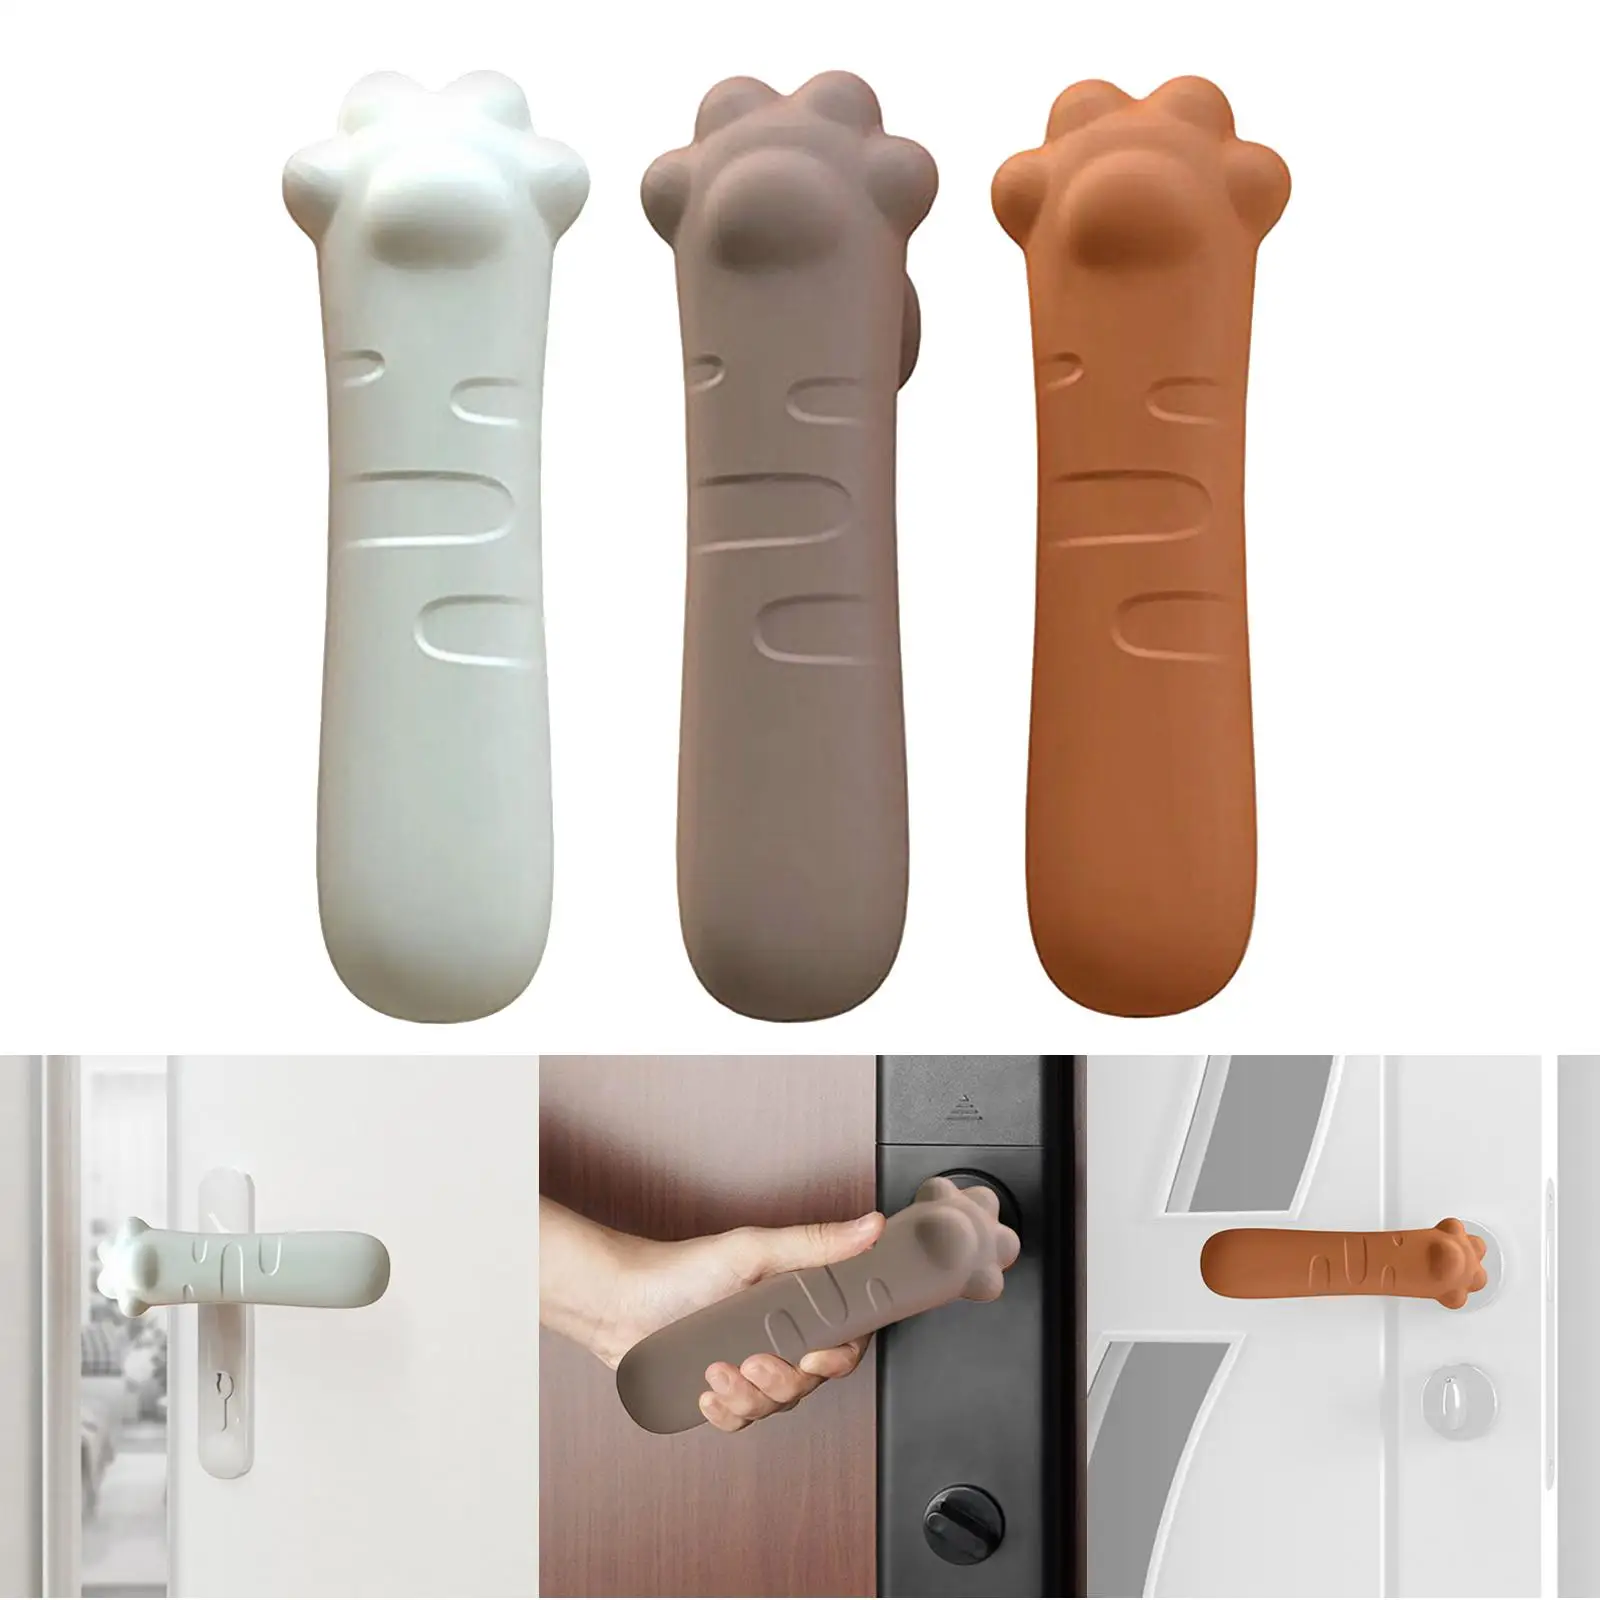 Door Handle Cover Anti Static Protector Baby Safety Sleeve Gloves Door Handle Safety Guard Doorknob Cover for Office Home School